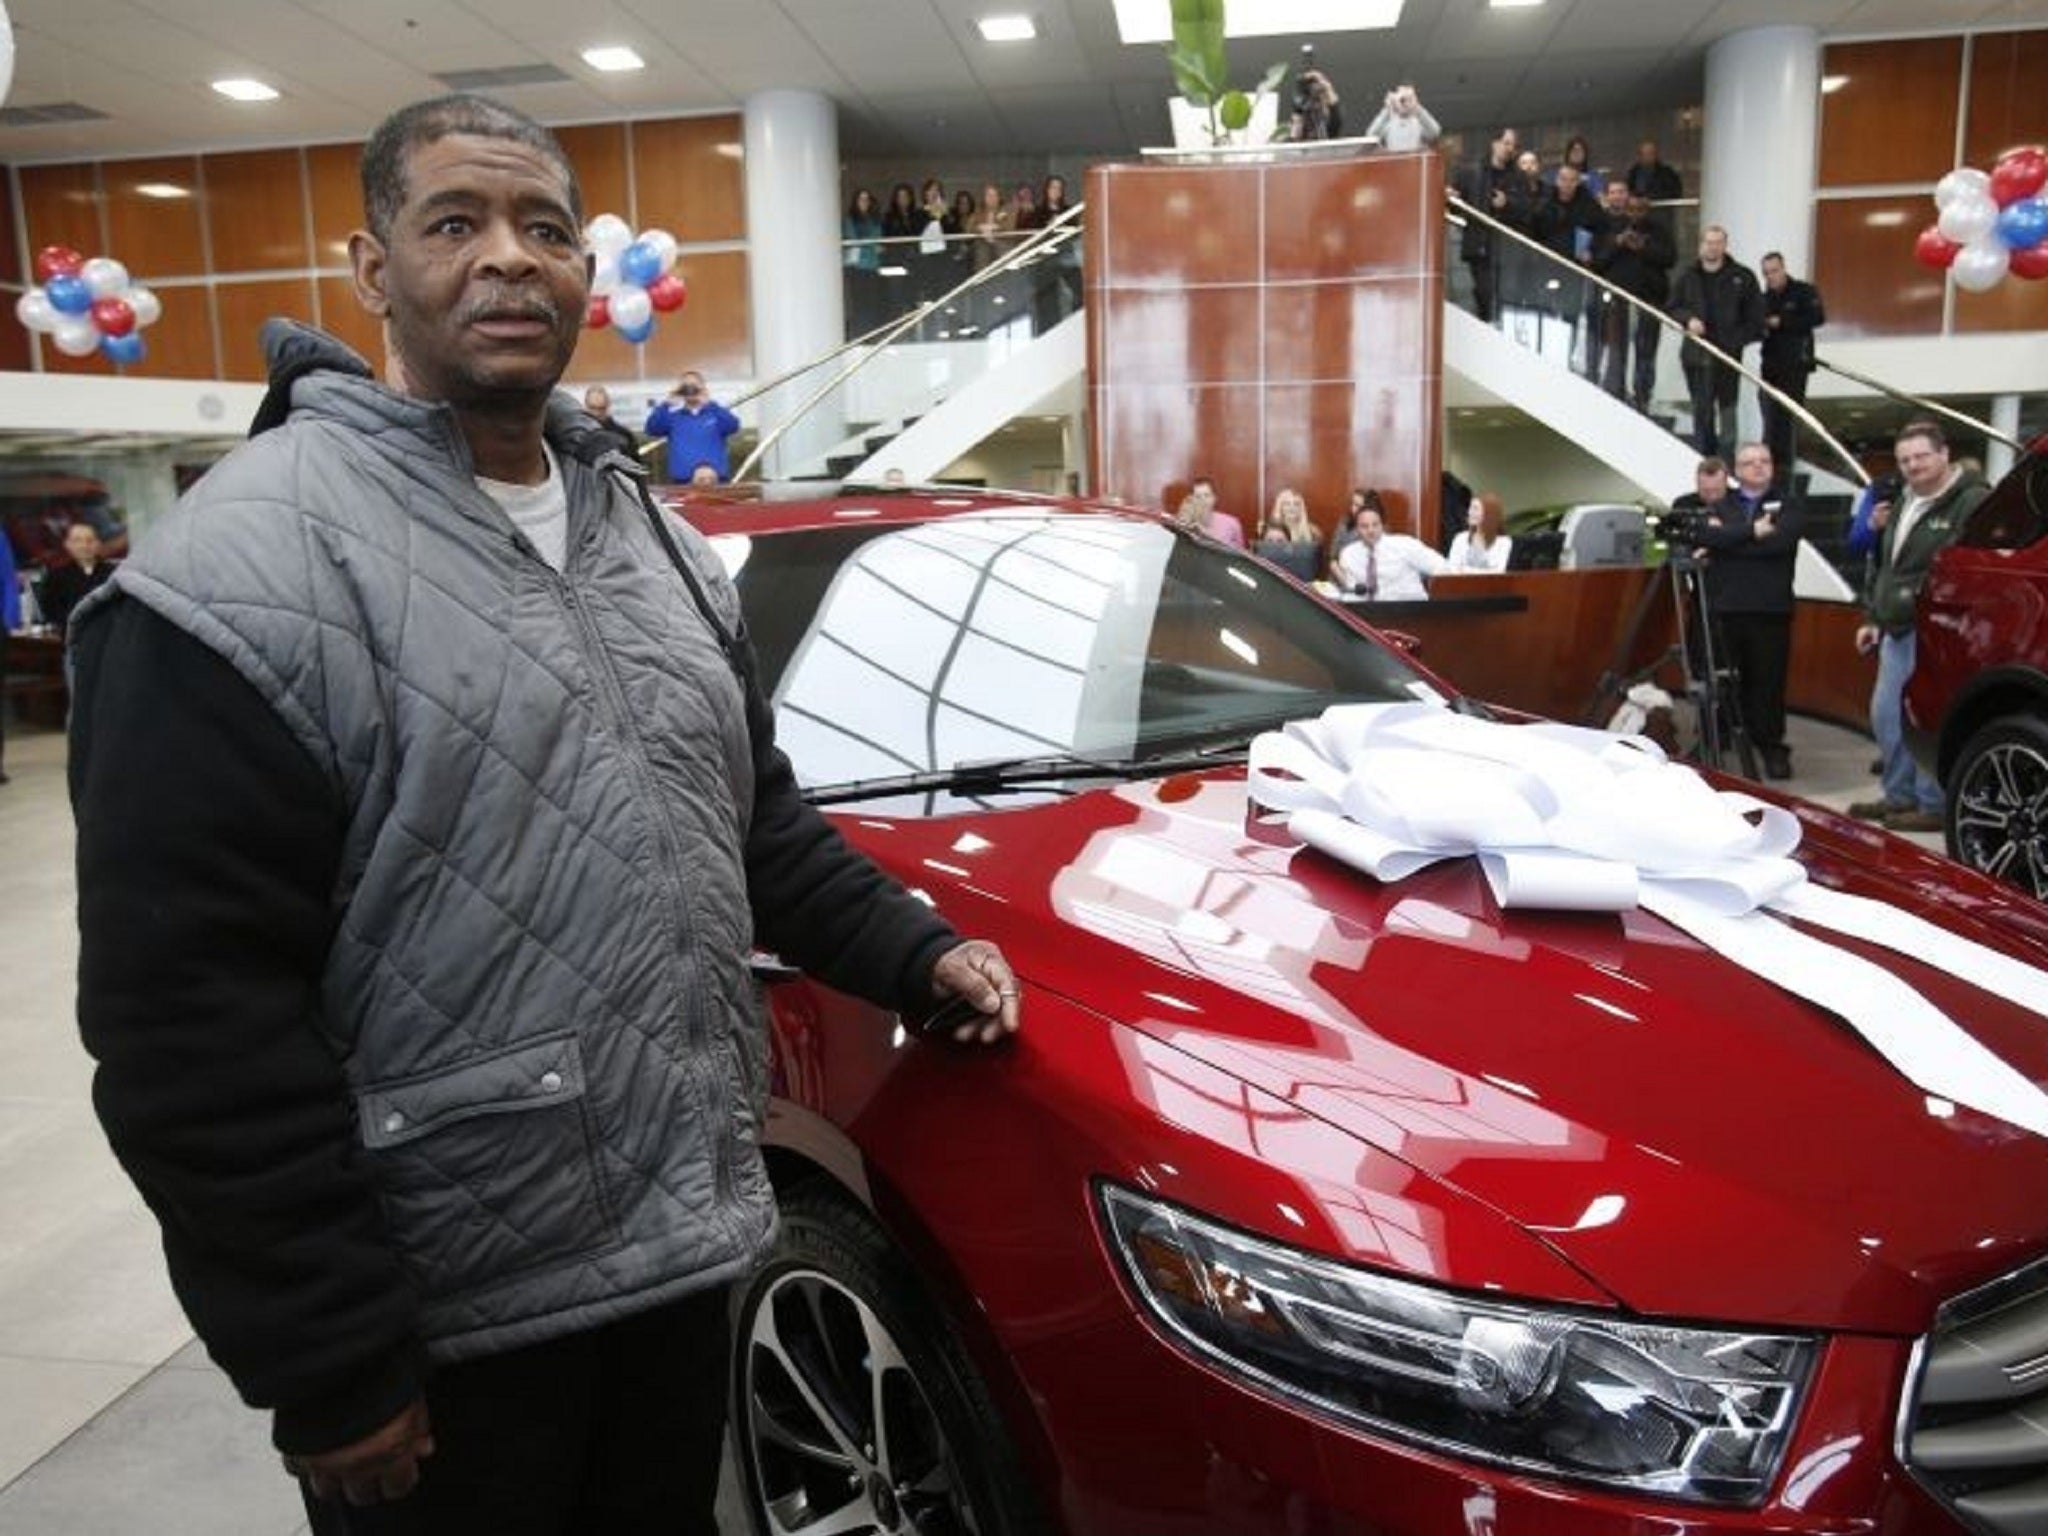 Mr Robertson was given a new car for free as well as $350,000